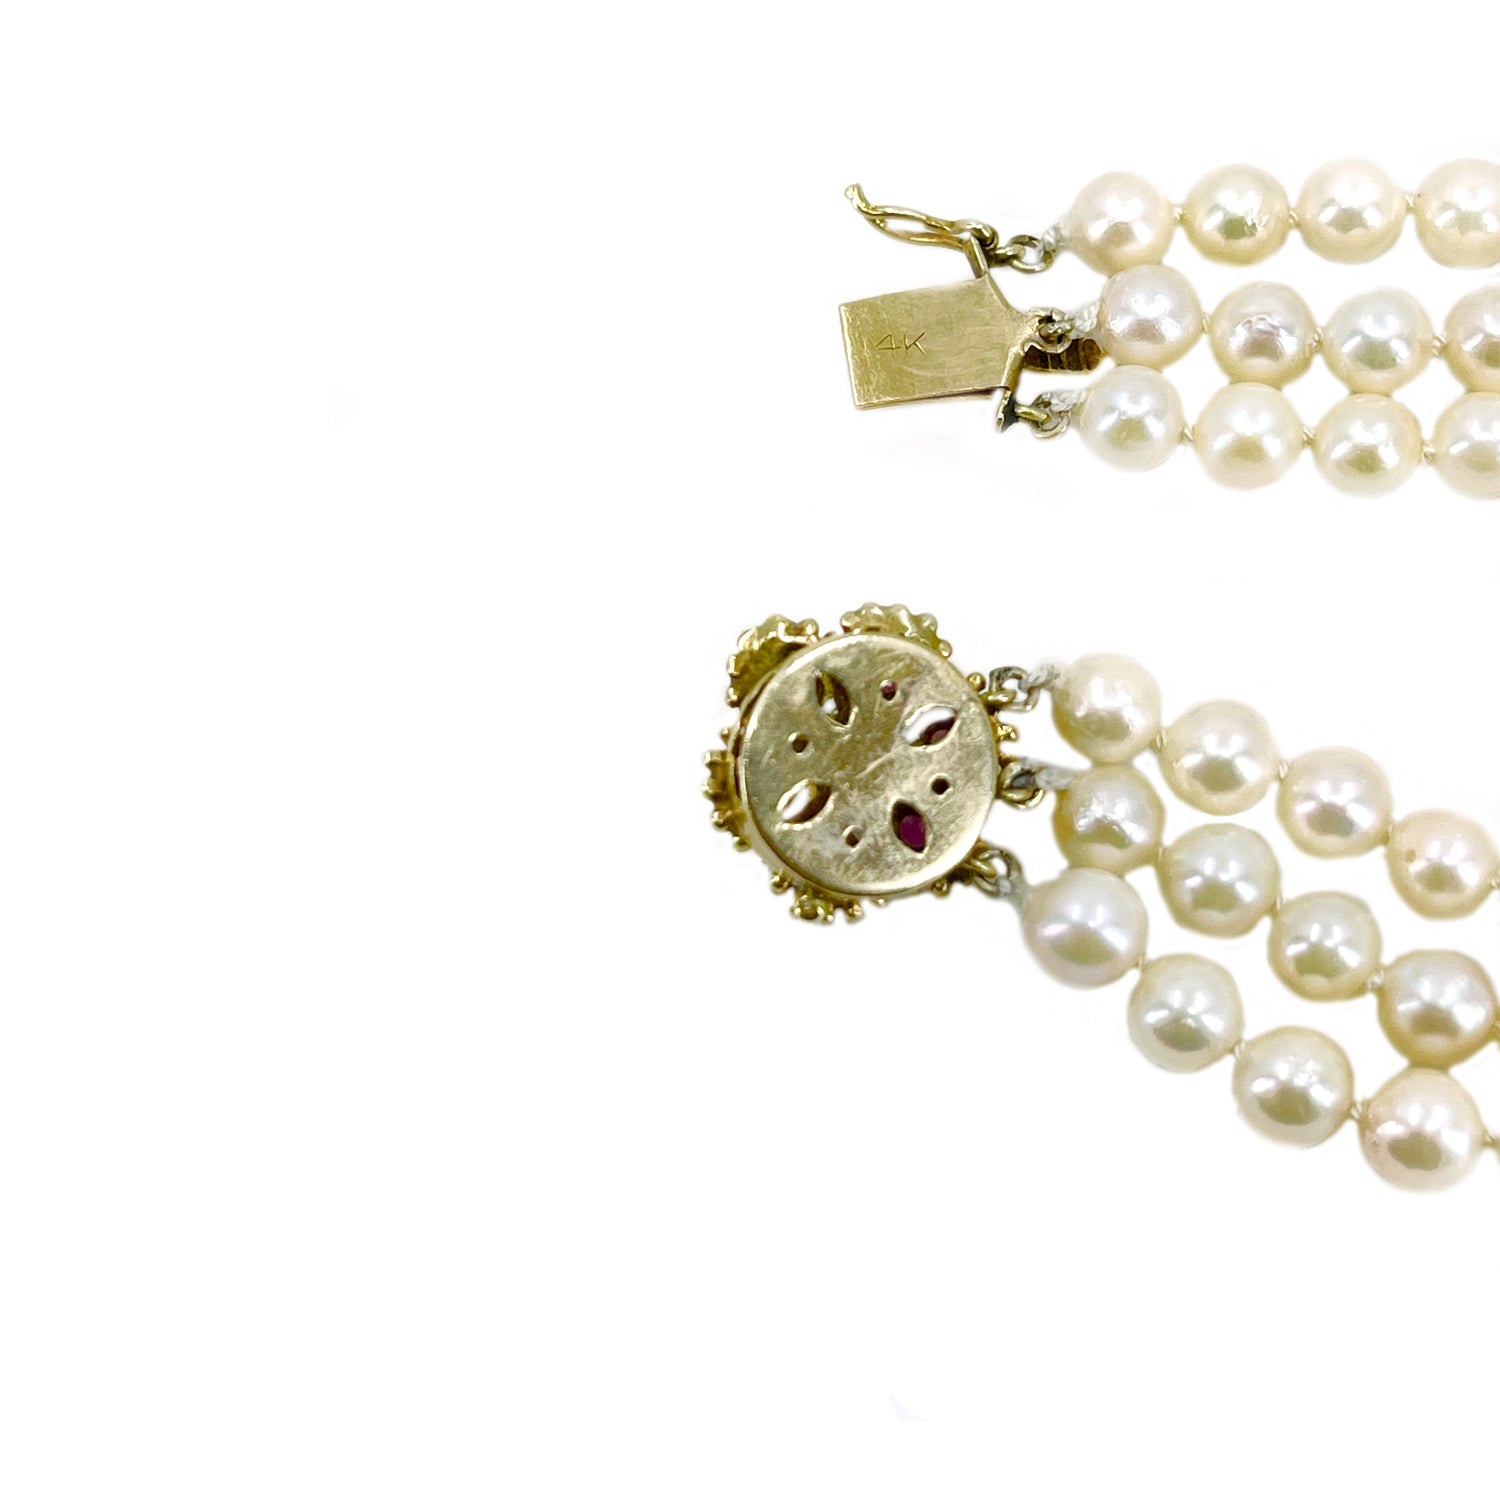 Three Strand Floral Vintage Akoya Saltwater Cultured Pearl Natural Ruby Bracelet- 14K Yellow Gold